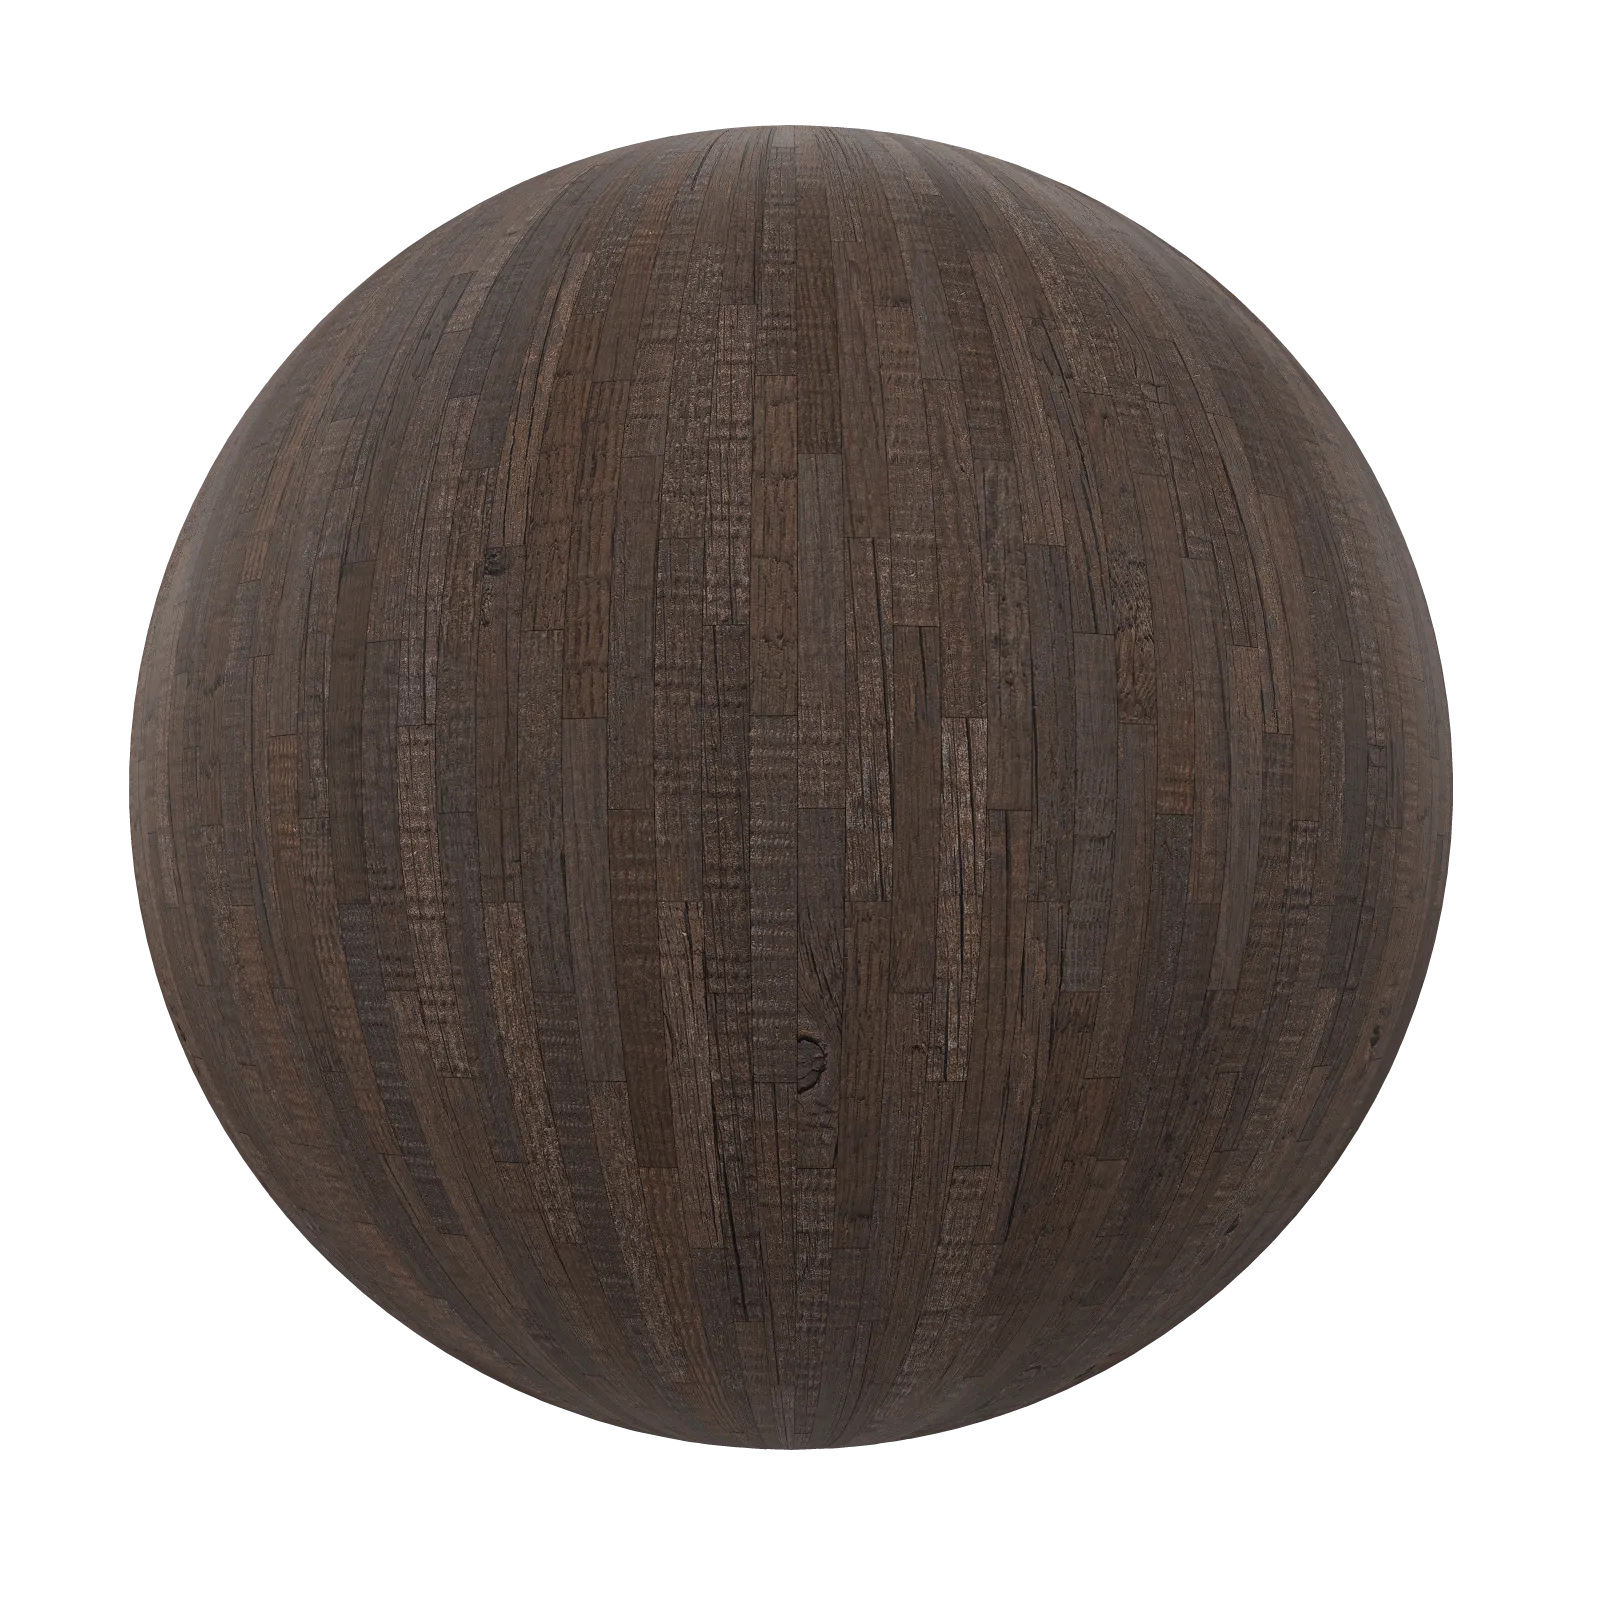 TEXTURES – WOOD – Old Wood Tiles 11